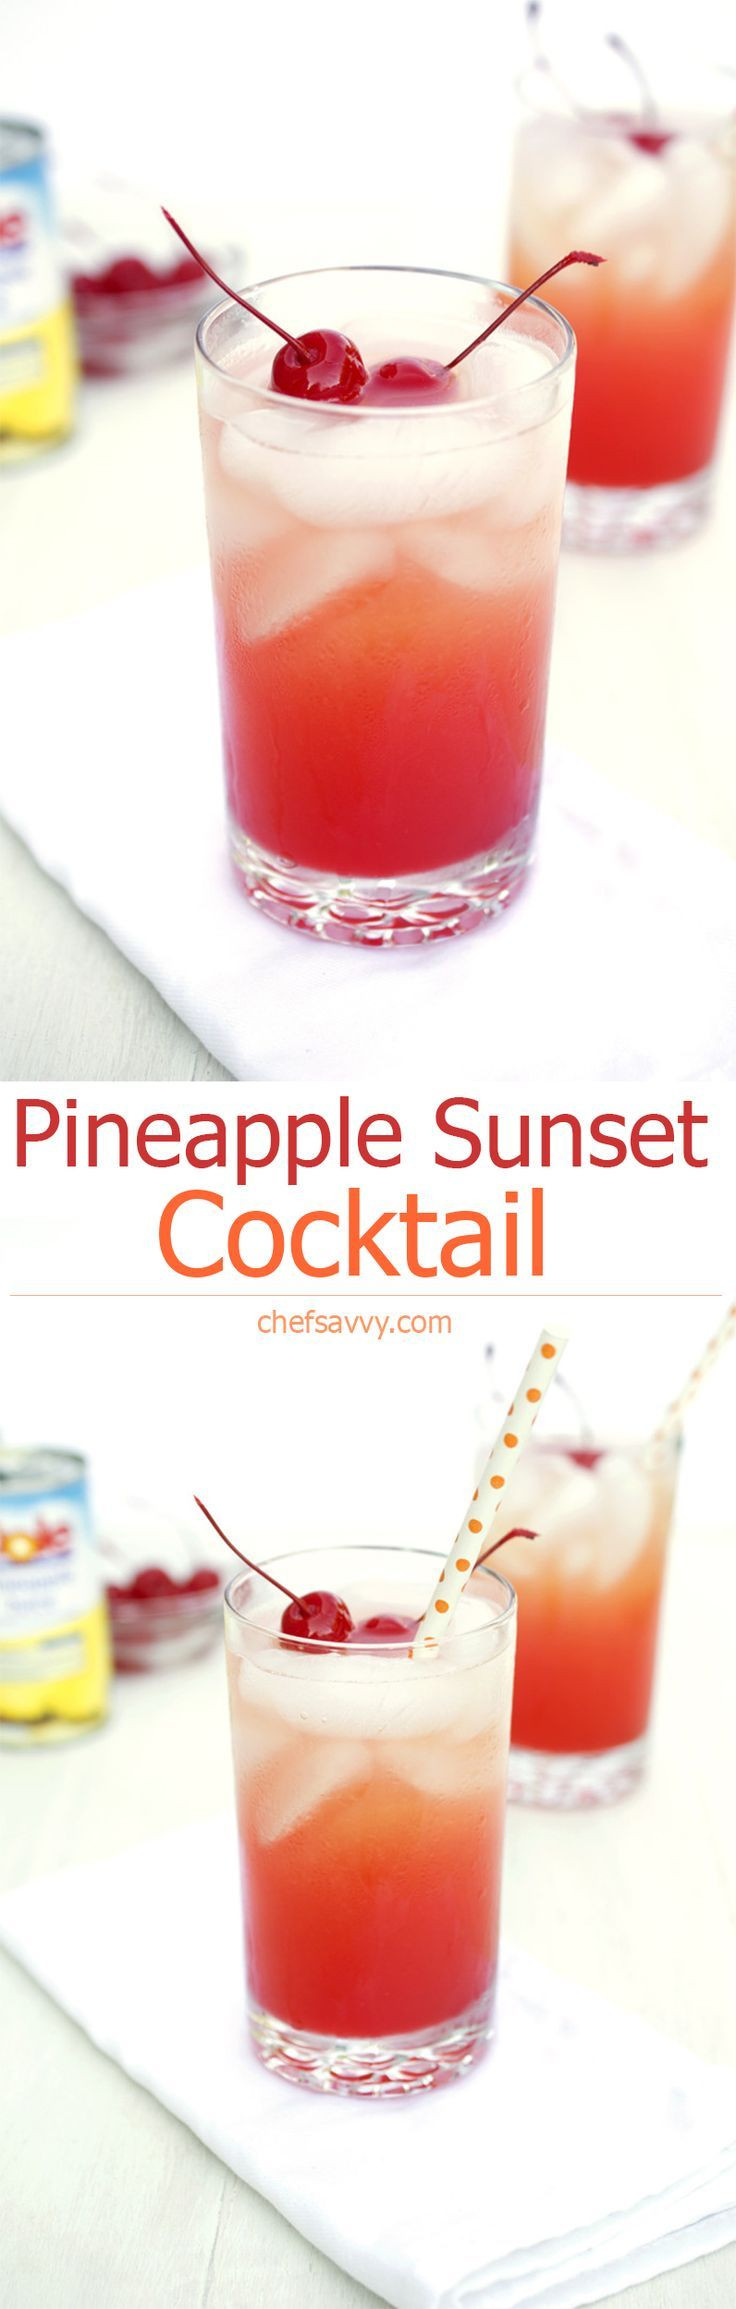 Summer Mixed Drinks With Vodka
 25 best ideas about Pineapple Vodka Drinks on Pinterest